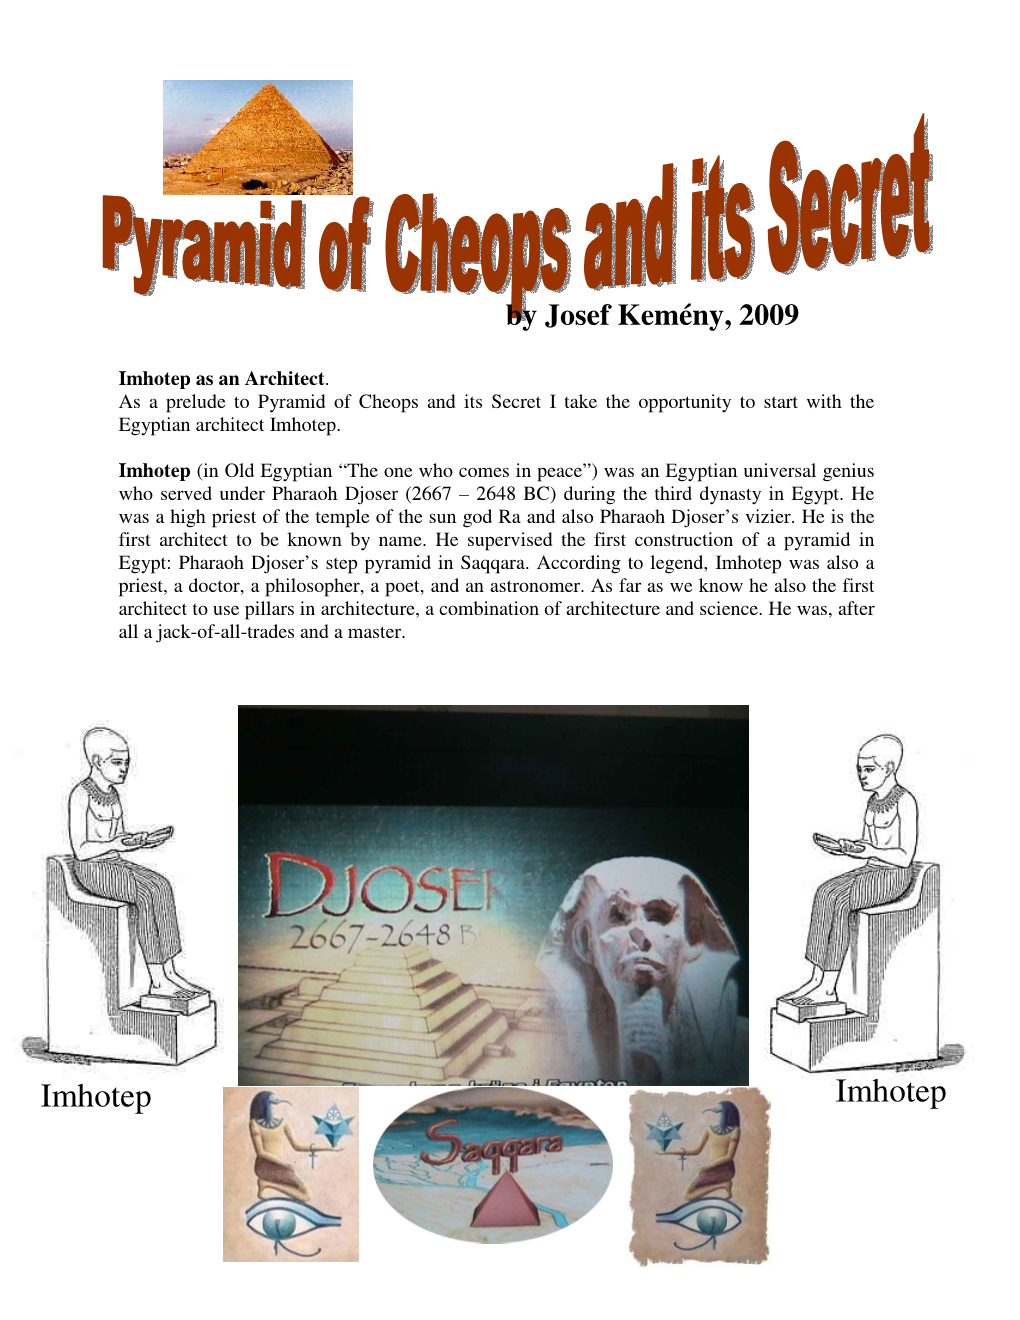 Pyramid of Cheops and Its Secret I Take the Opportunity to Start with the Egyptian Architect Imhotep